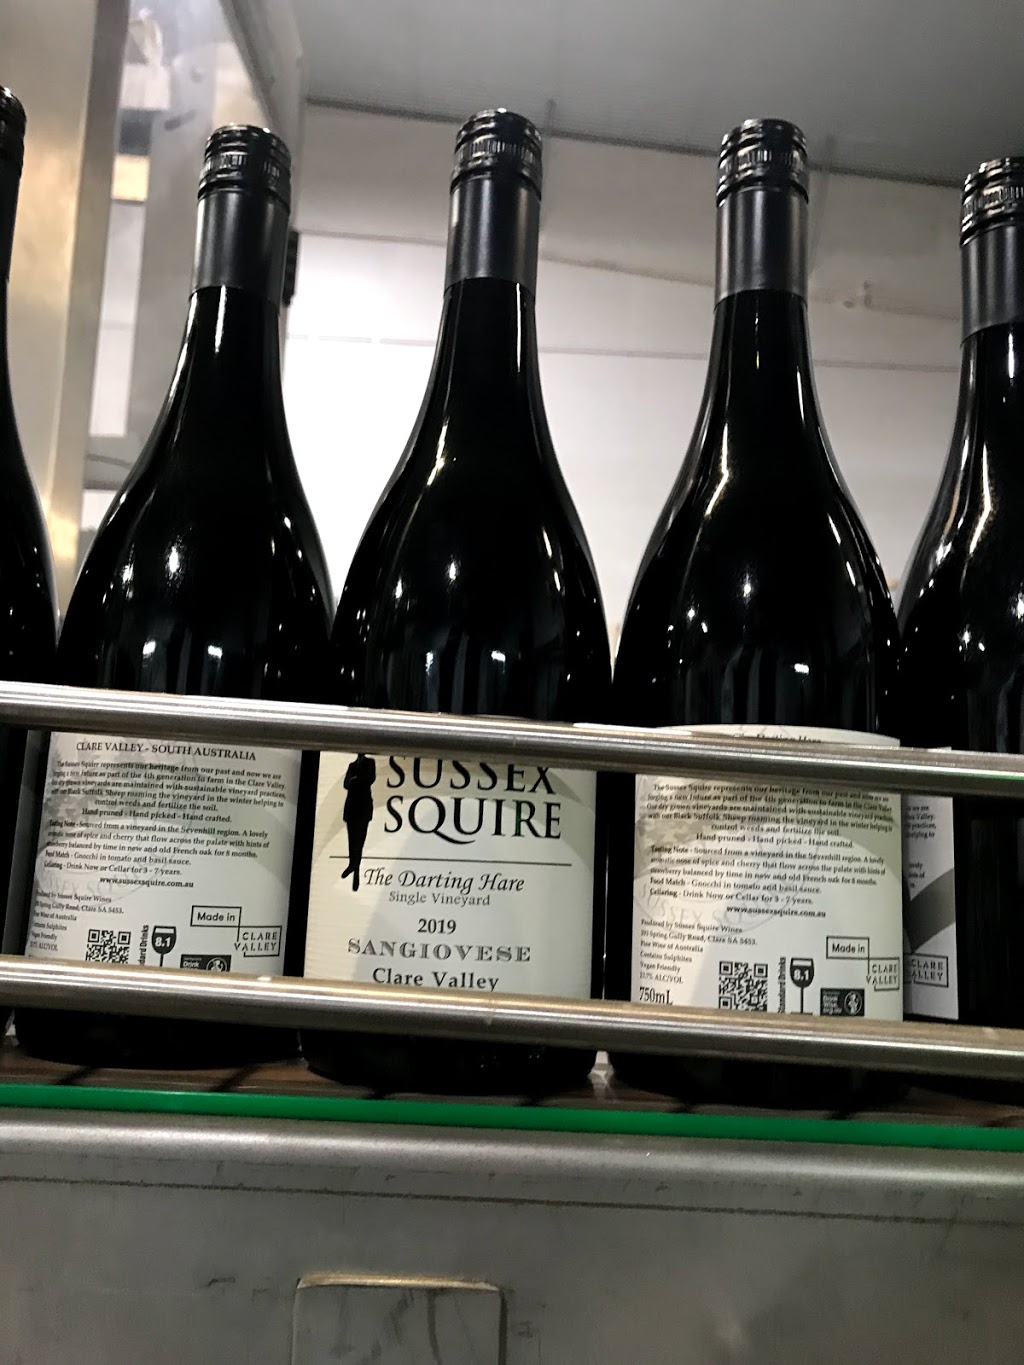 Sussex Squire Wines | 293-295 Spring Gully Rd, Clare SA 5453, Australia | Phone: 0458 141 169